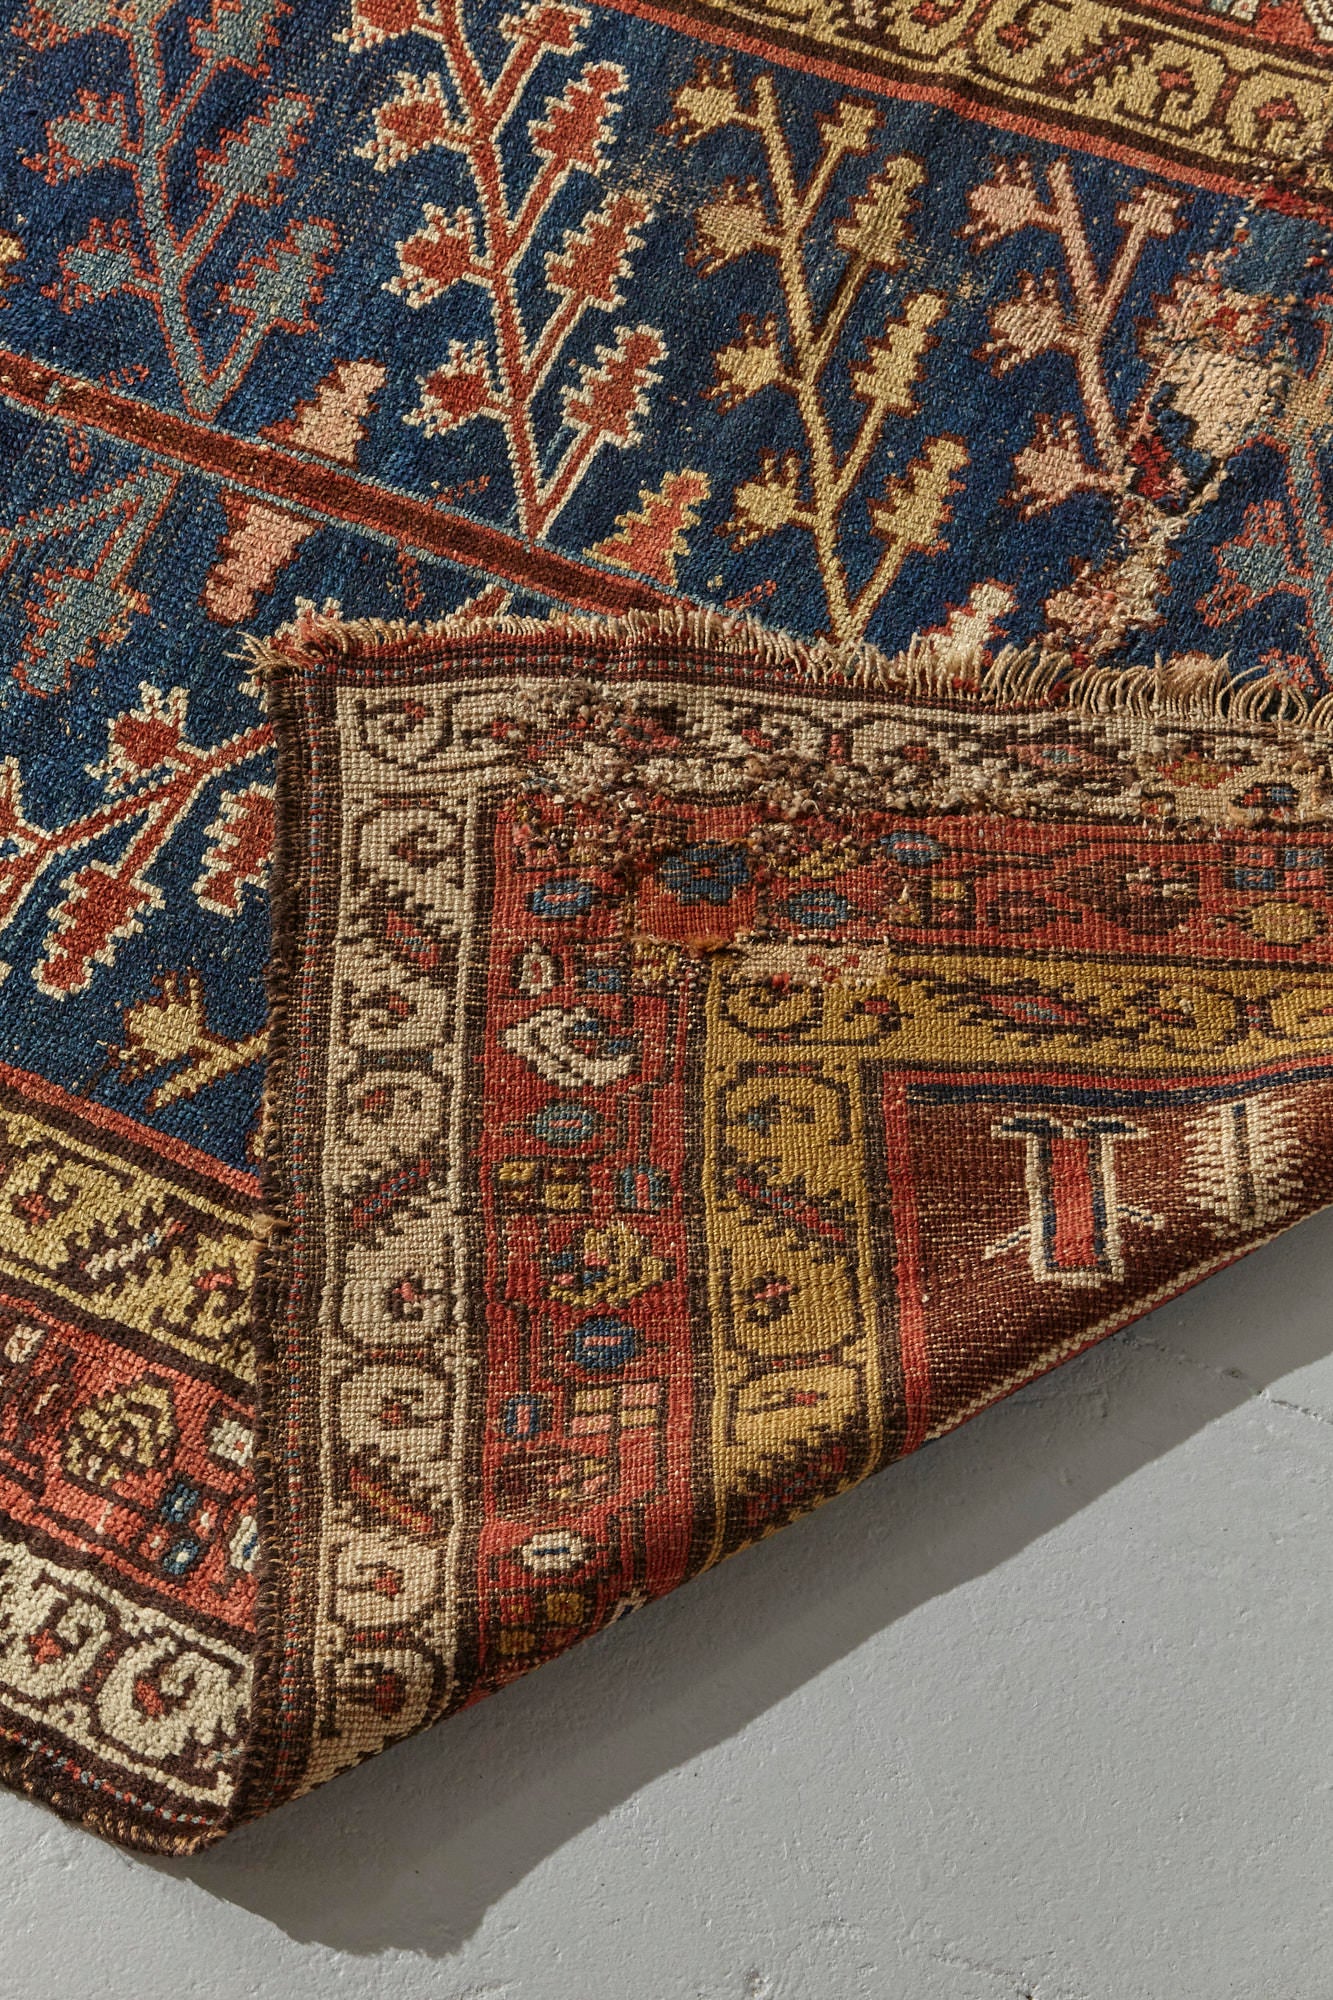 Front and back of Kurdish antique Persian rug, hand woven with tree of life design on a blue background with gold, red, pink and cream branch and leaf designs throughout, would be beautiful in a bedroom, kitchen, hallway or living room - Available from King Kennedy Rugs Los Angeles